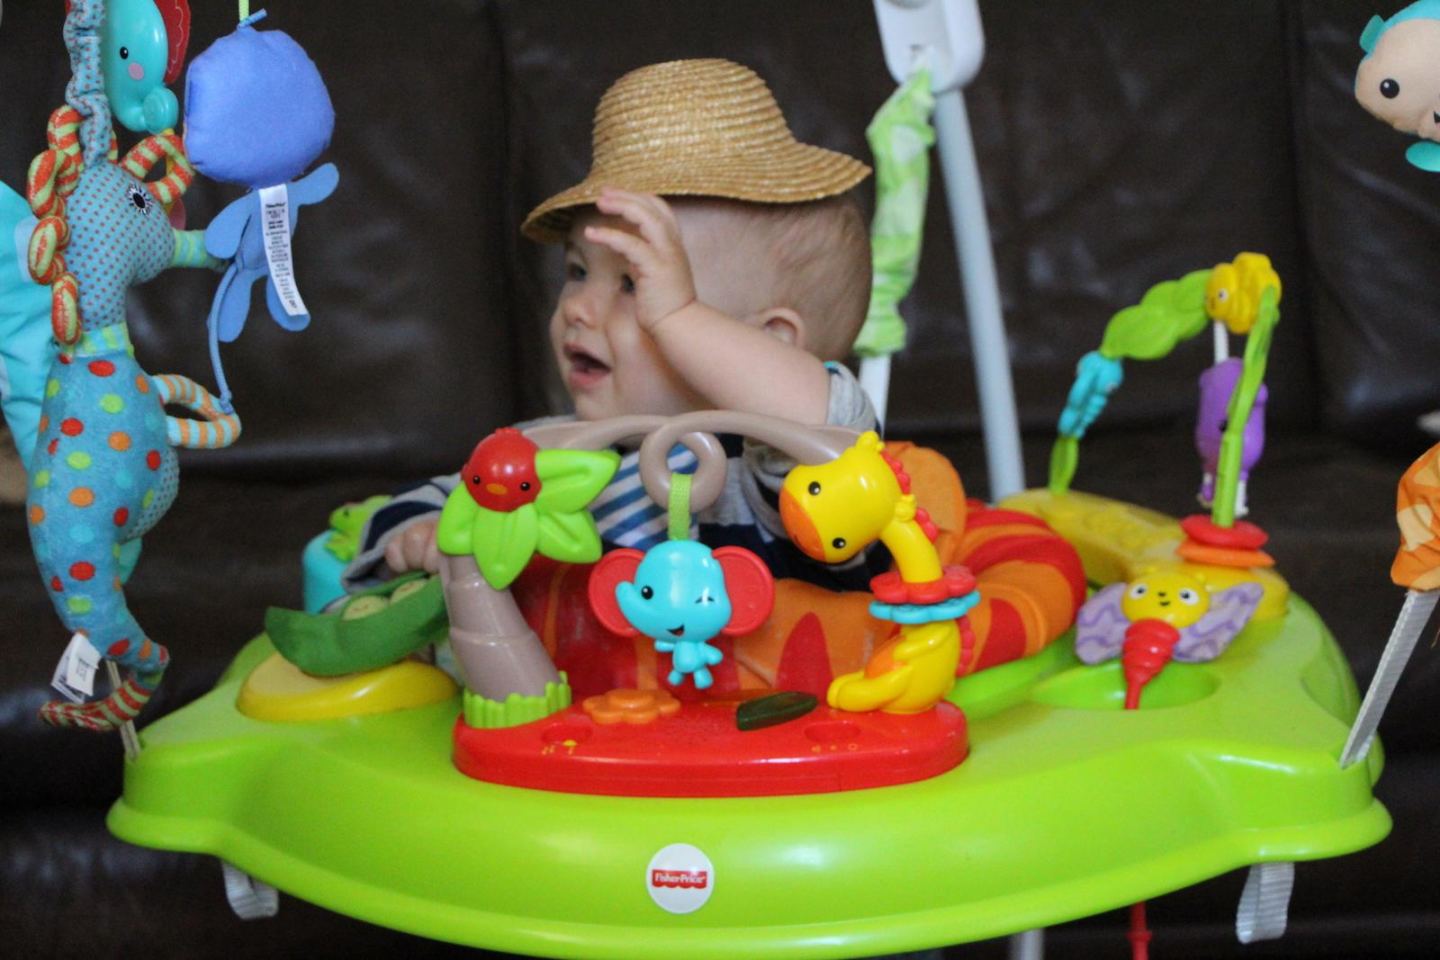 fisher price jumperoo review